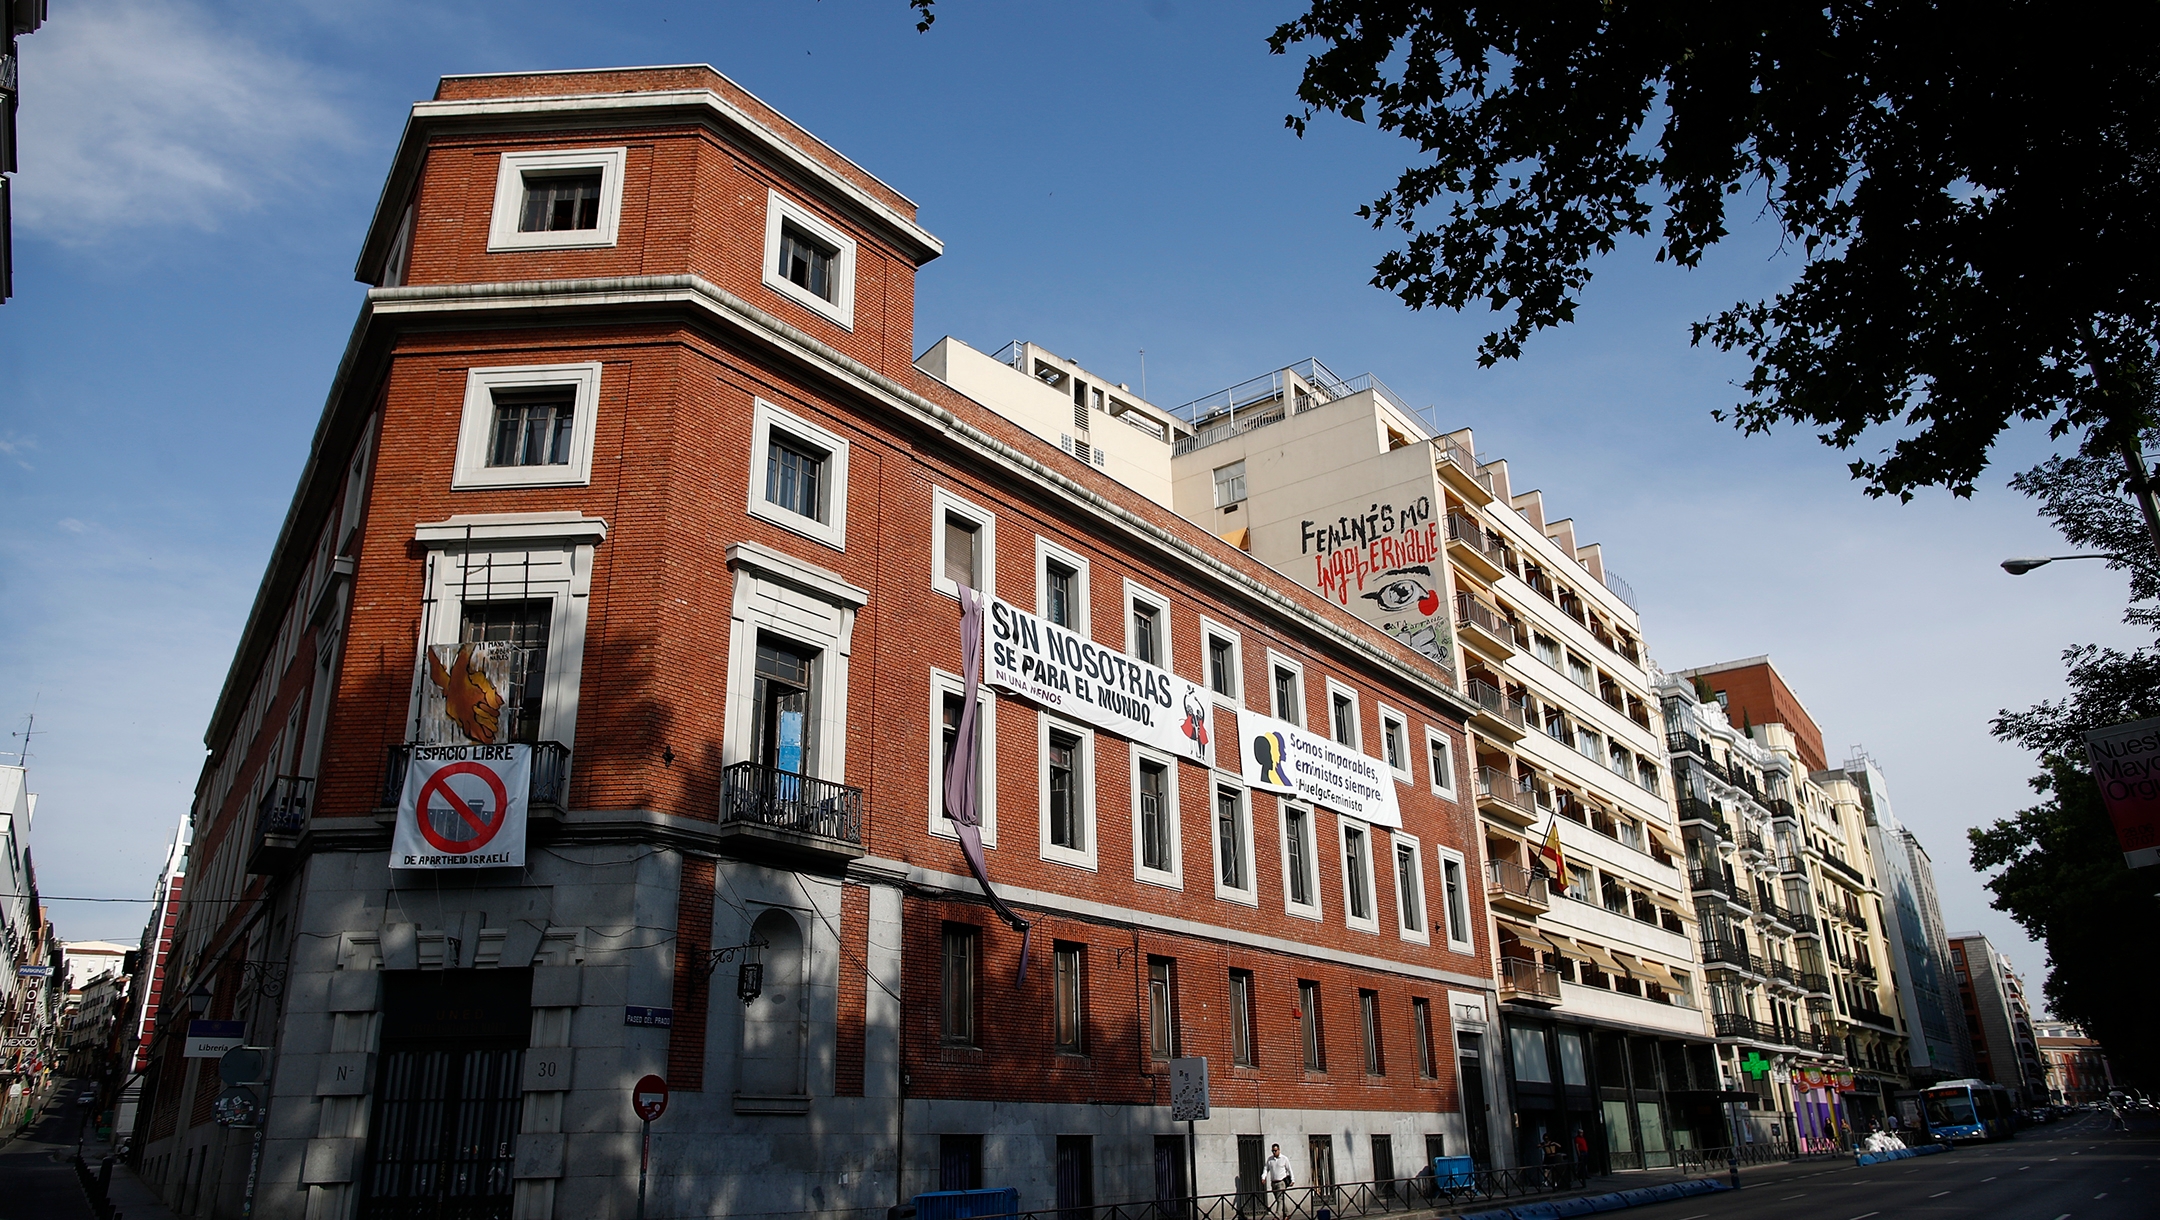 The building known as The Ungovernable, which is to become the Jewish museum of Madrid, Spain, pictured when it was still illegally occupied by far-left activists on July 4, 2019 (Eduardo Parra/Europa Press via Getty Images)